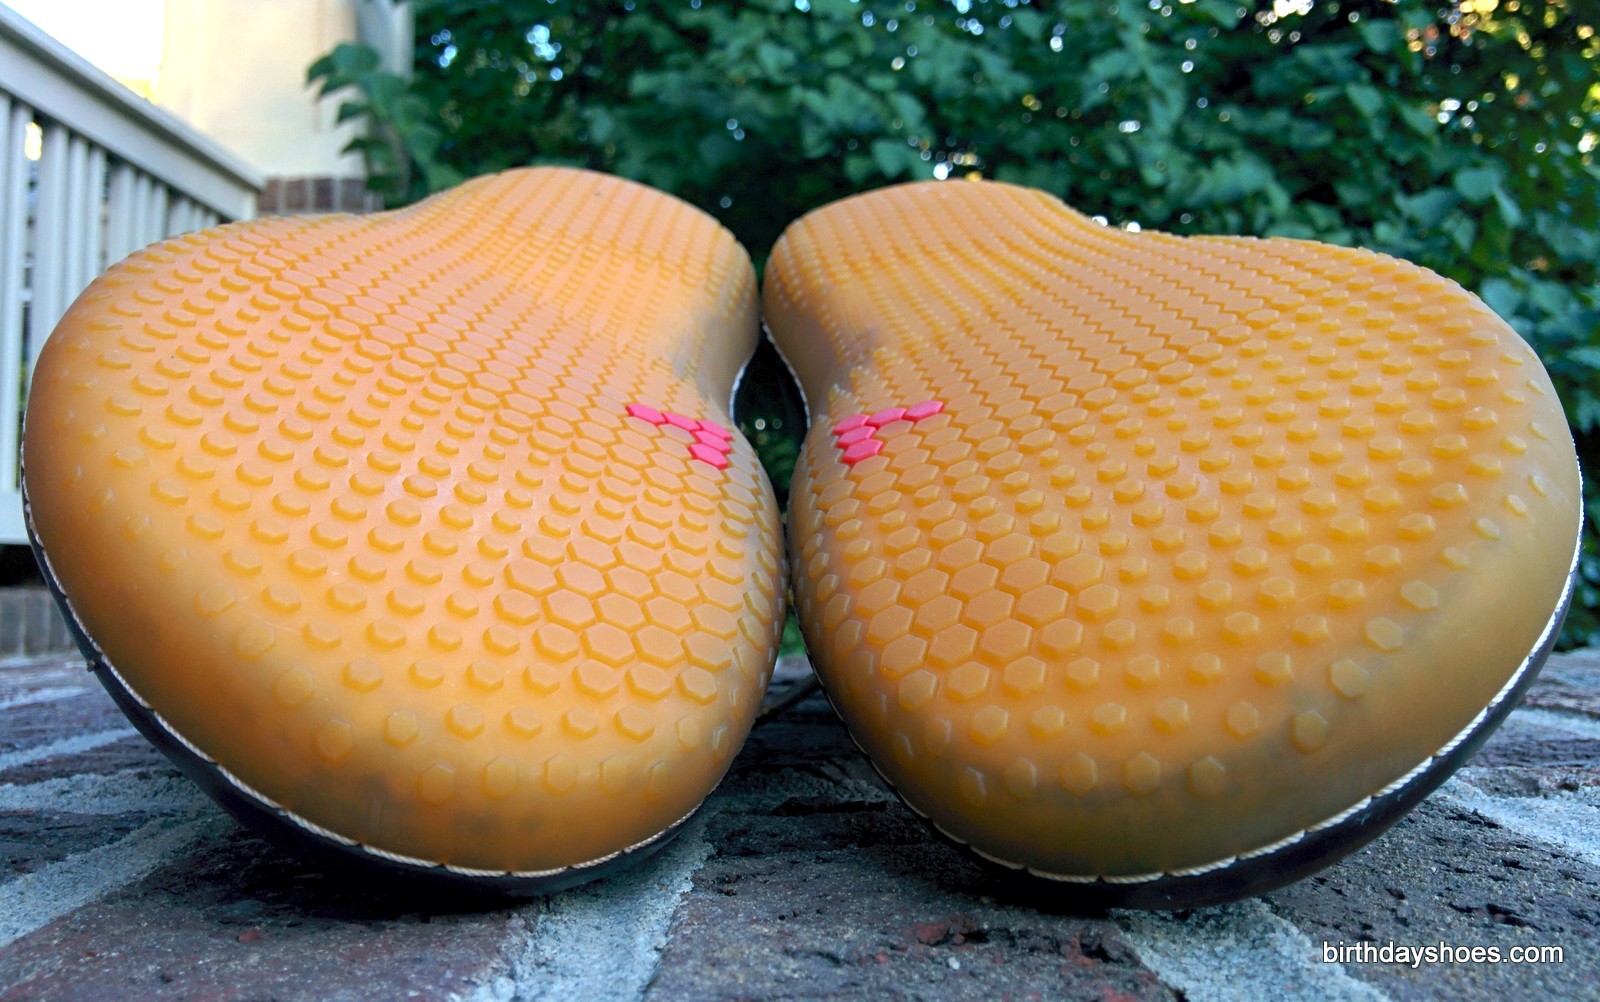 The Gobi II features a the new 3mm "V - LIFE" sole.